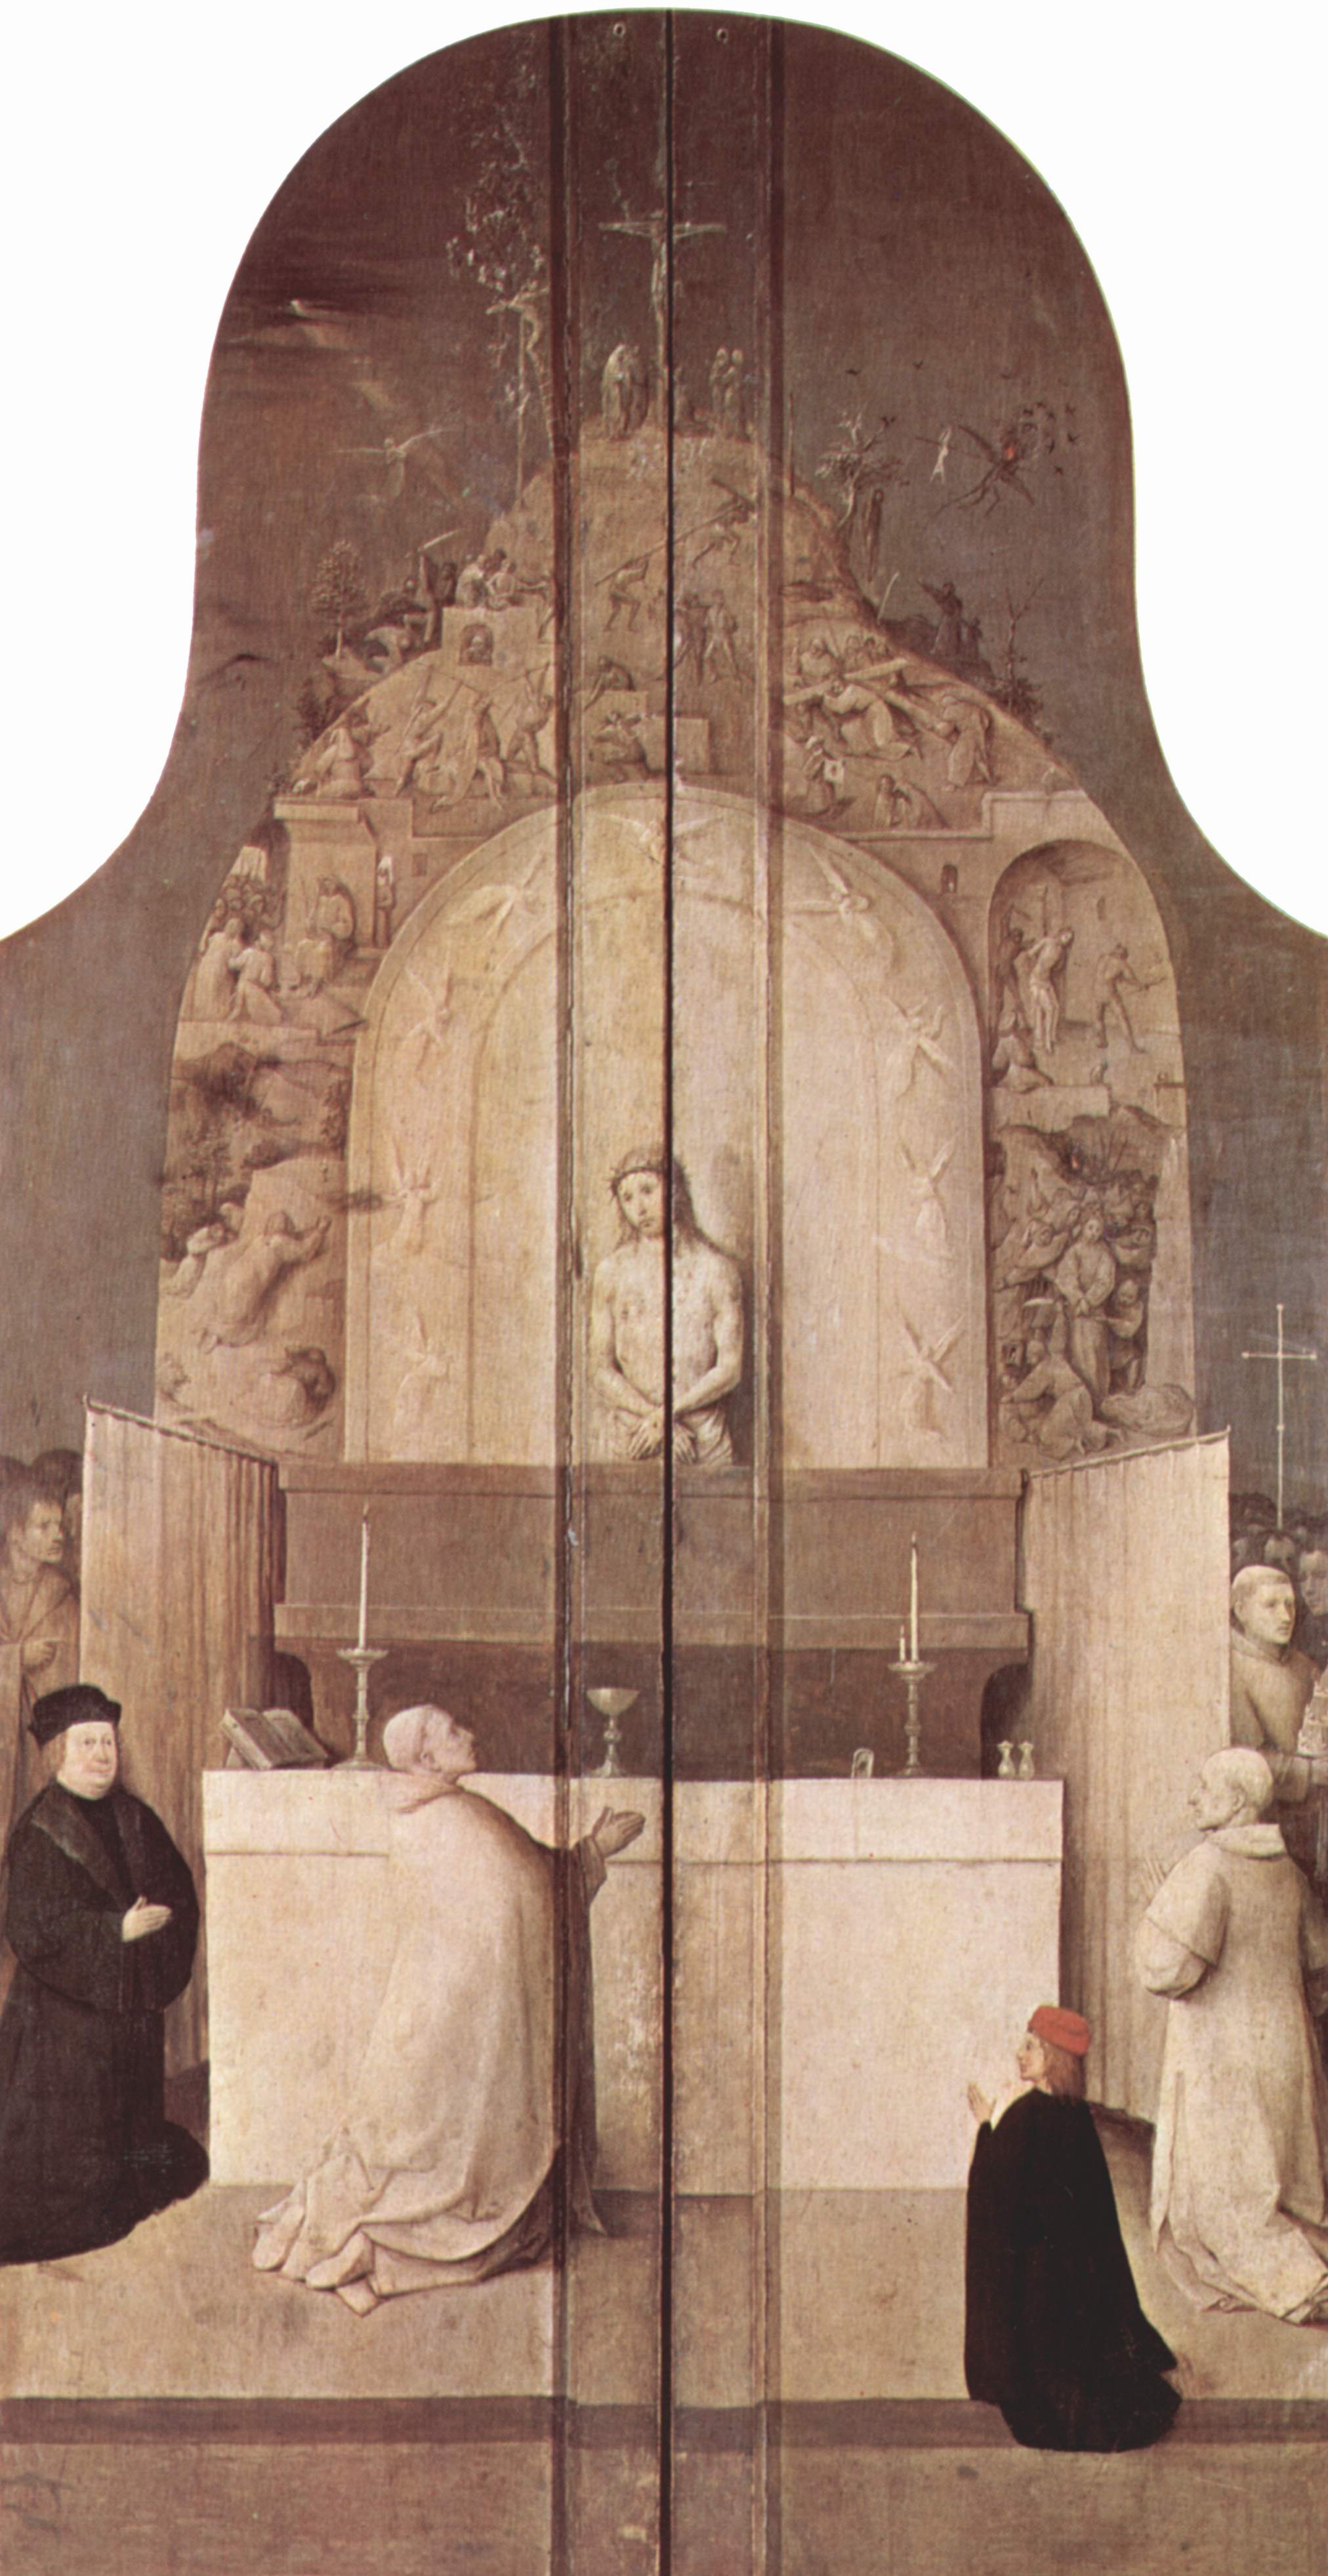 The Legend of the Mass of St. Gregory (1495).